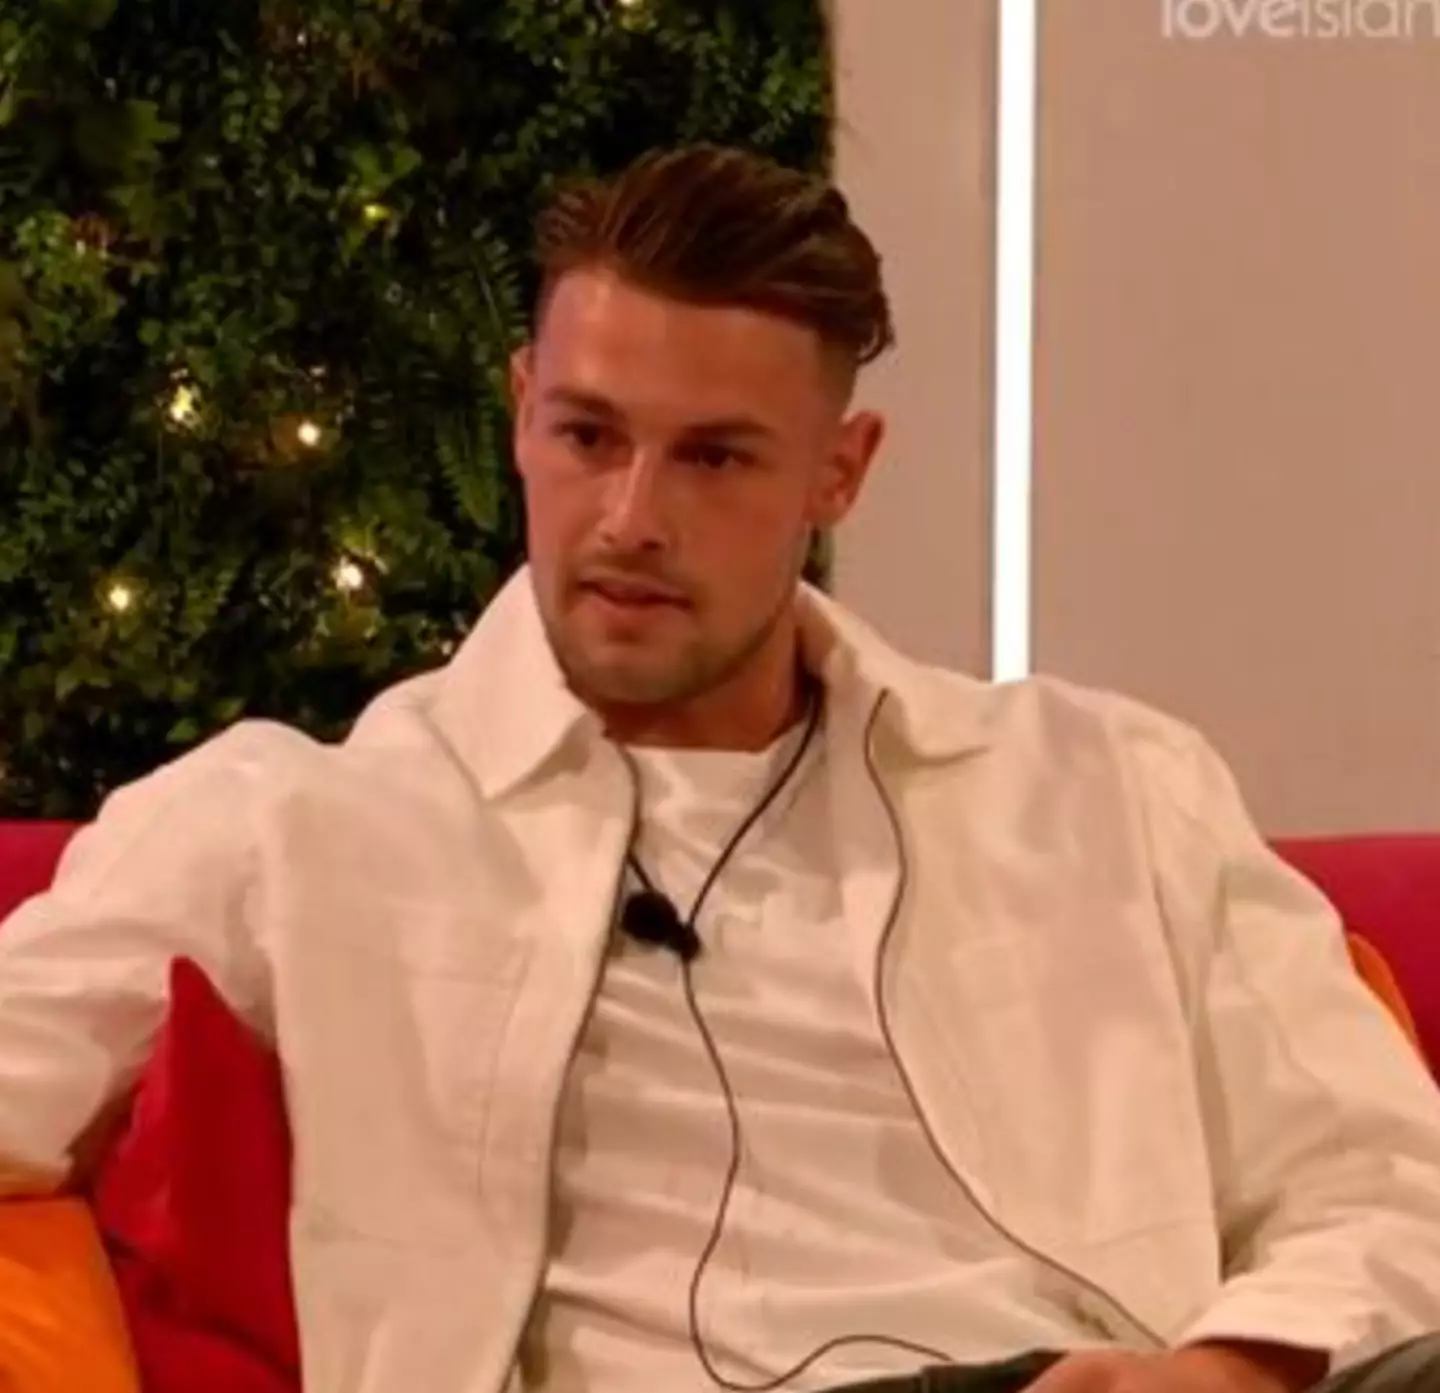 Andrew being confronted on Love Island.